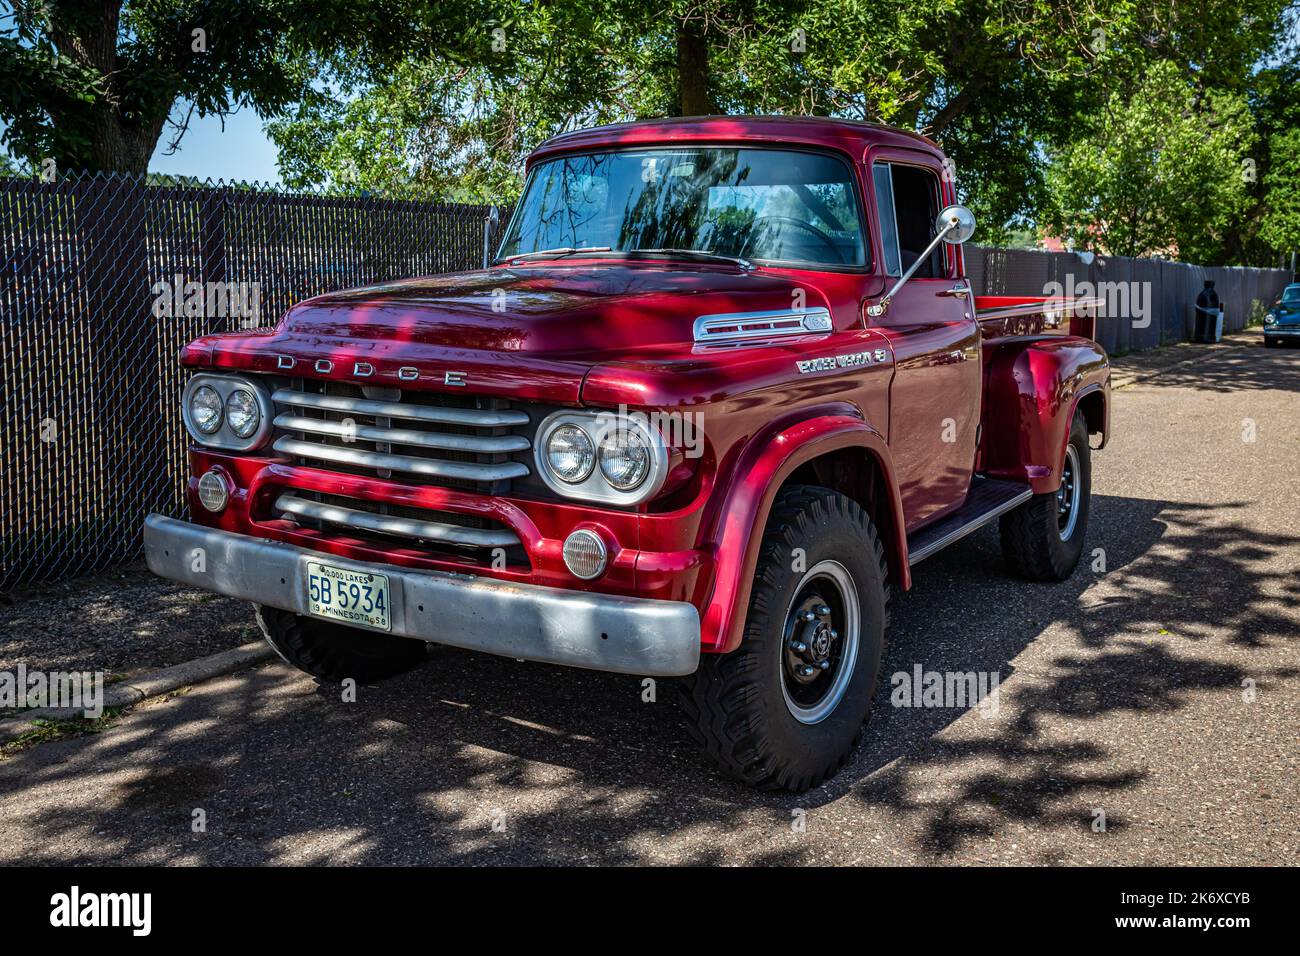 Falcon Heights, MN - June 19, 2022: High perspective front corner view of a 1958 Dodge W-100 Power Wagon Pickup Truck at a local car show. Stock Photo